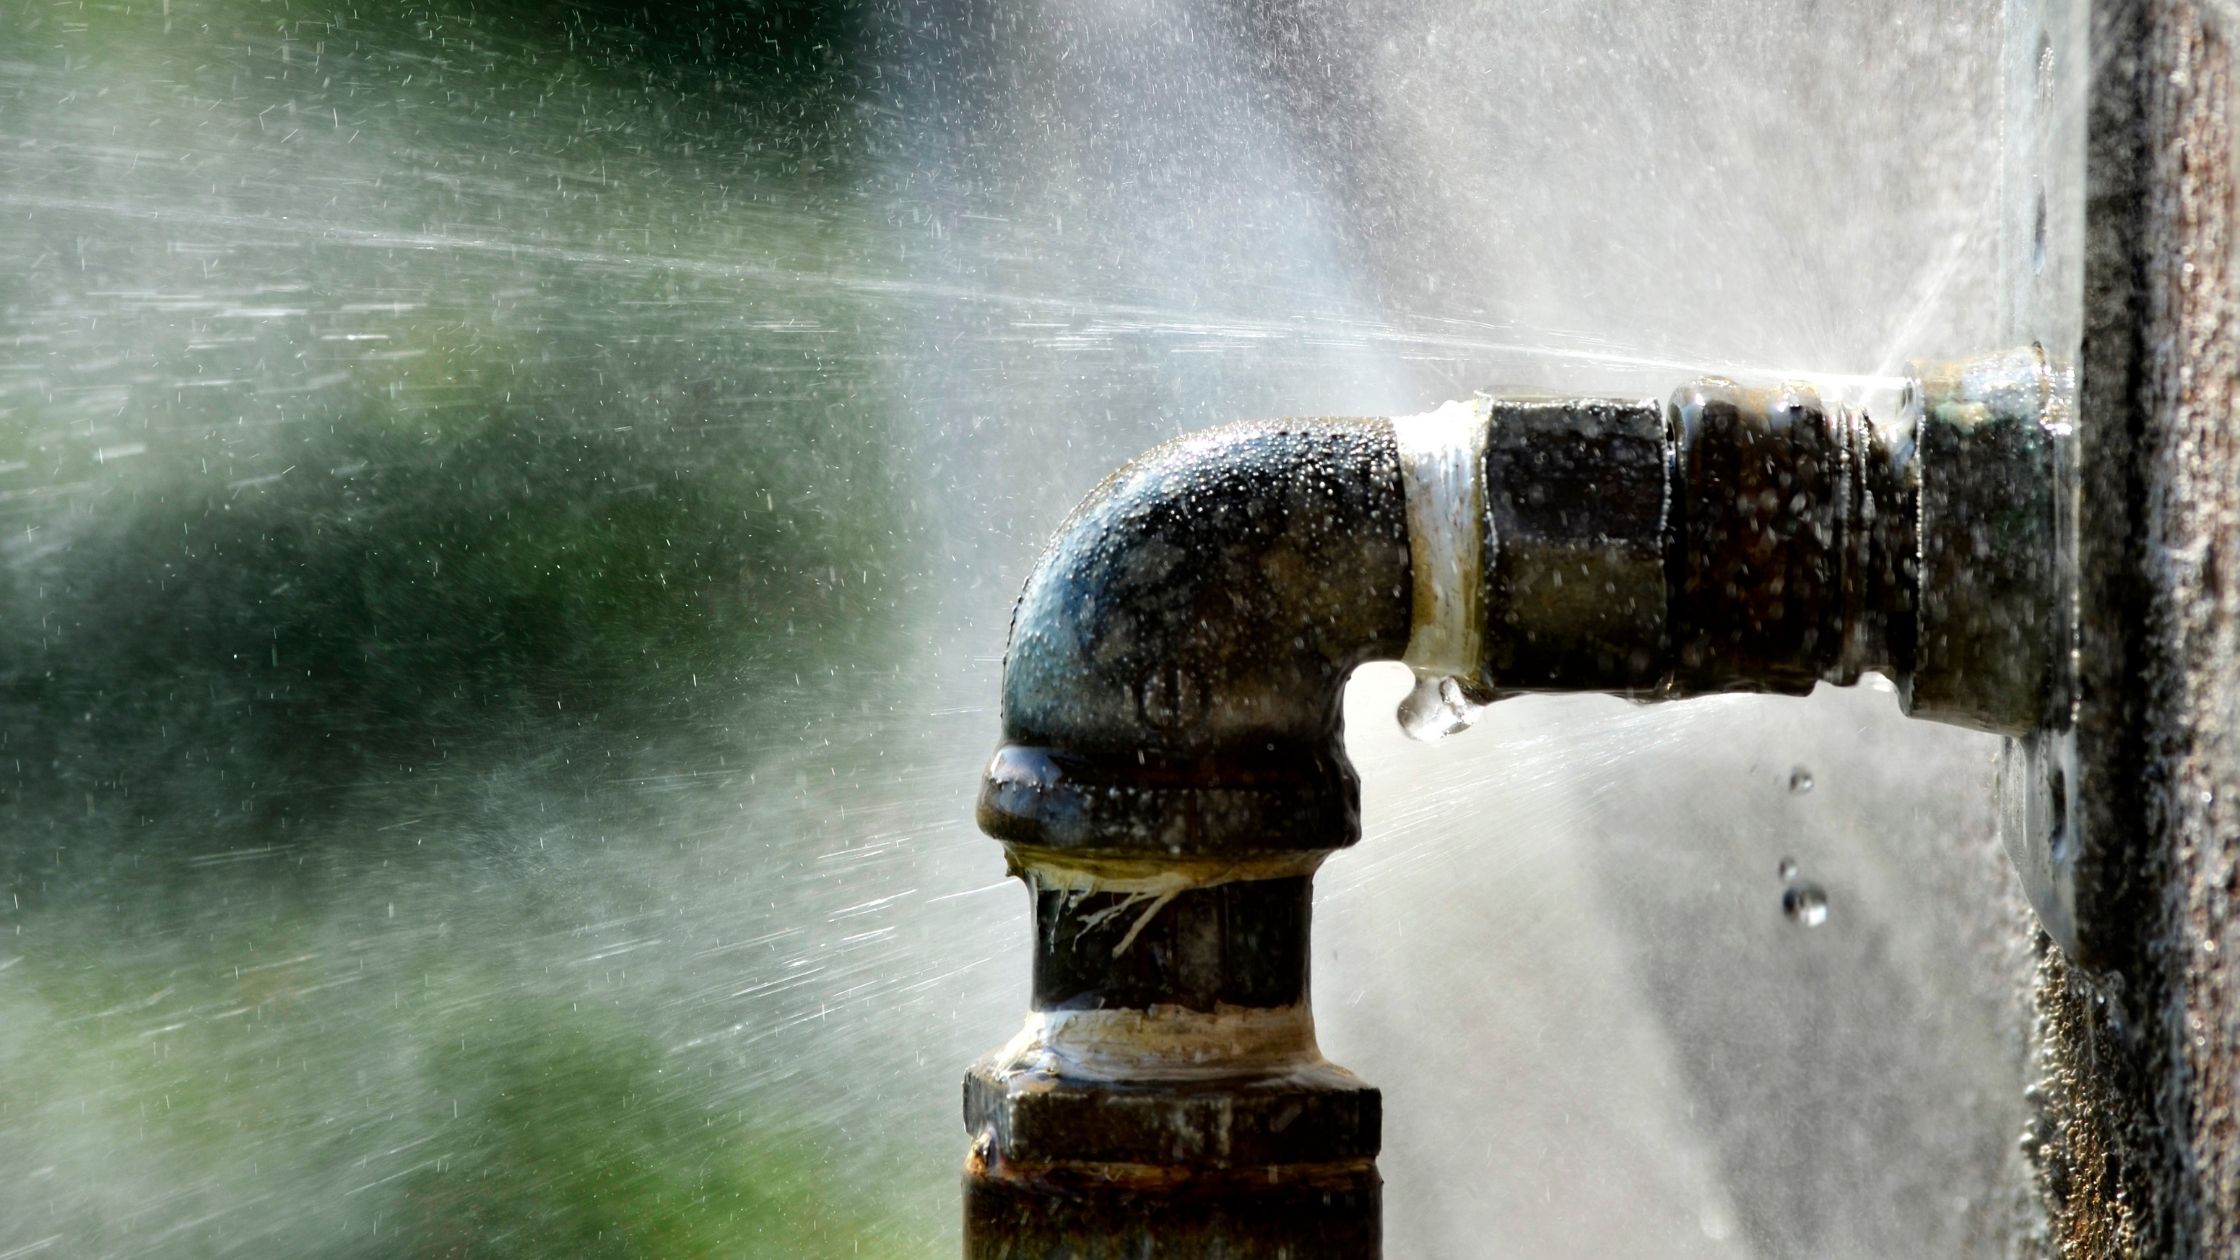 At Home: Winterize outdoor plumbing to avoid burst pipes